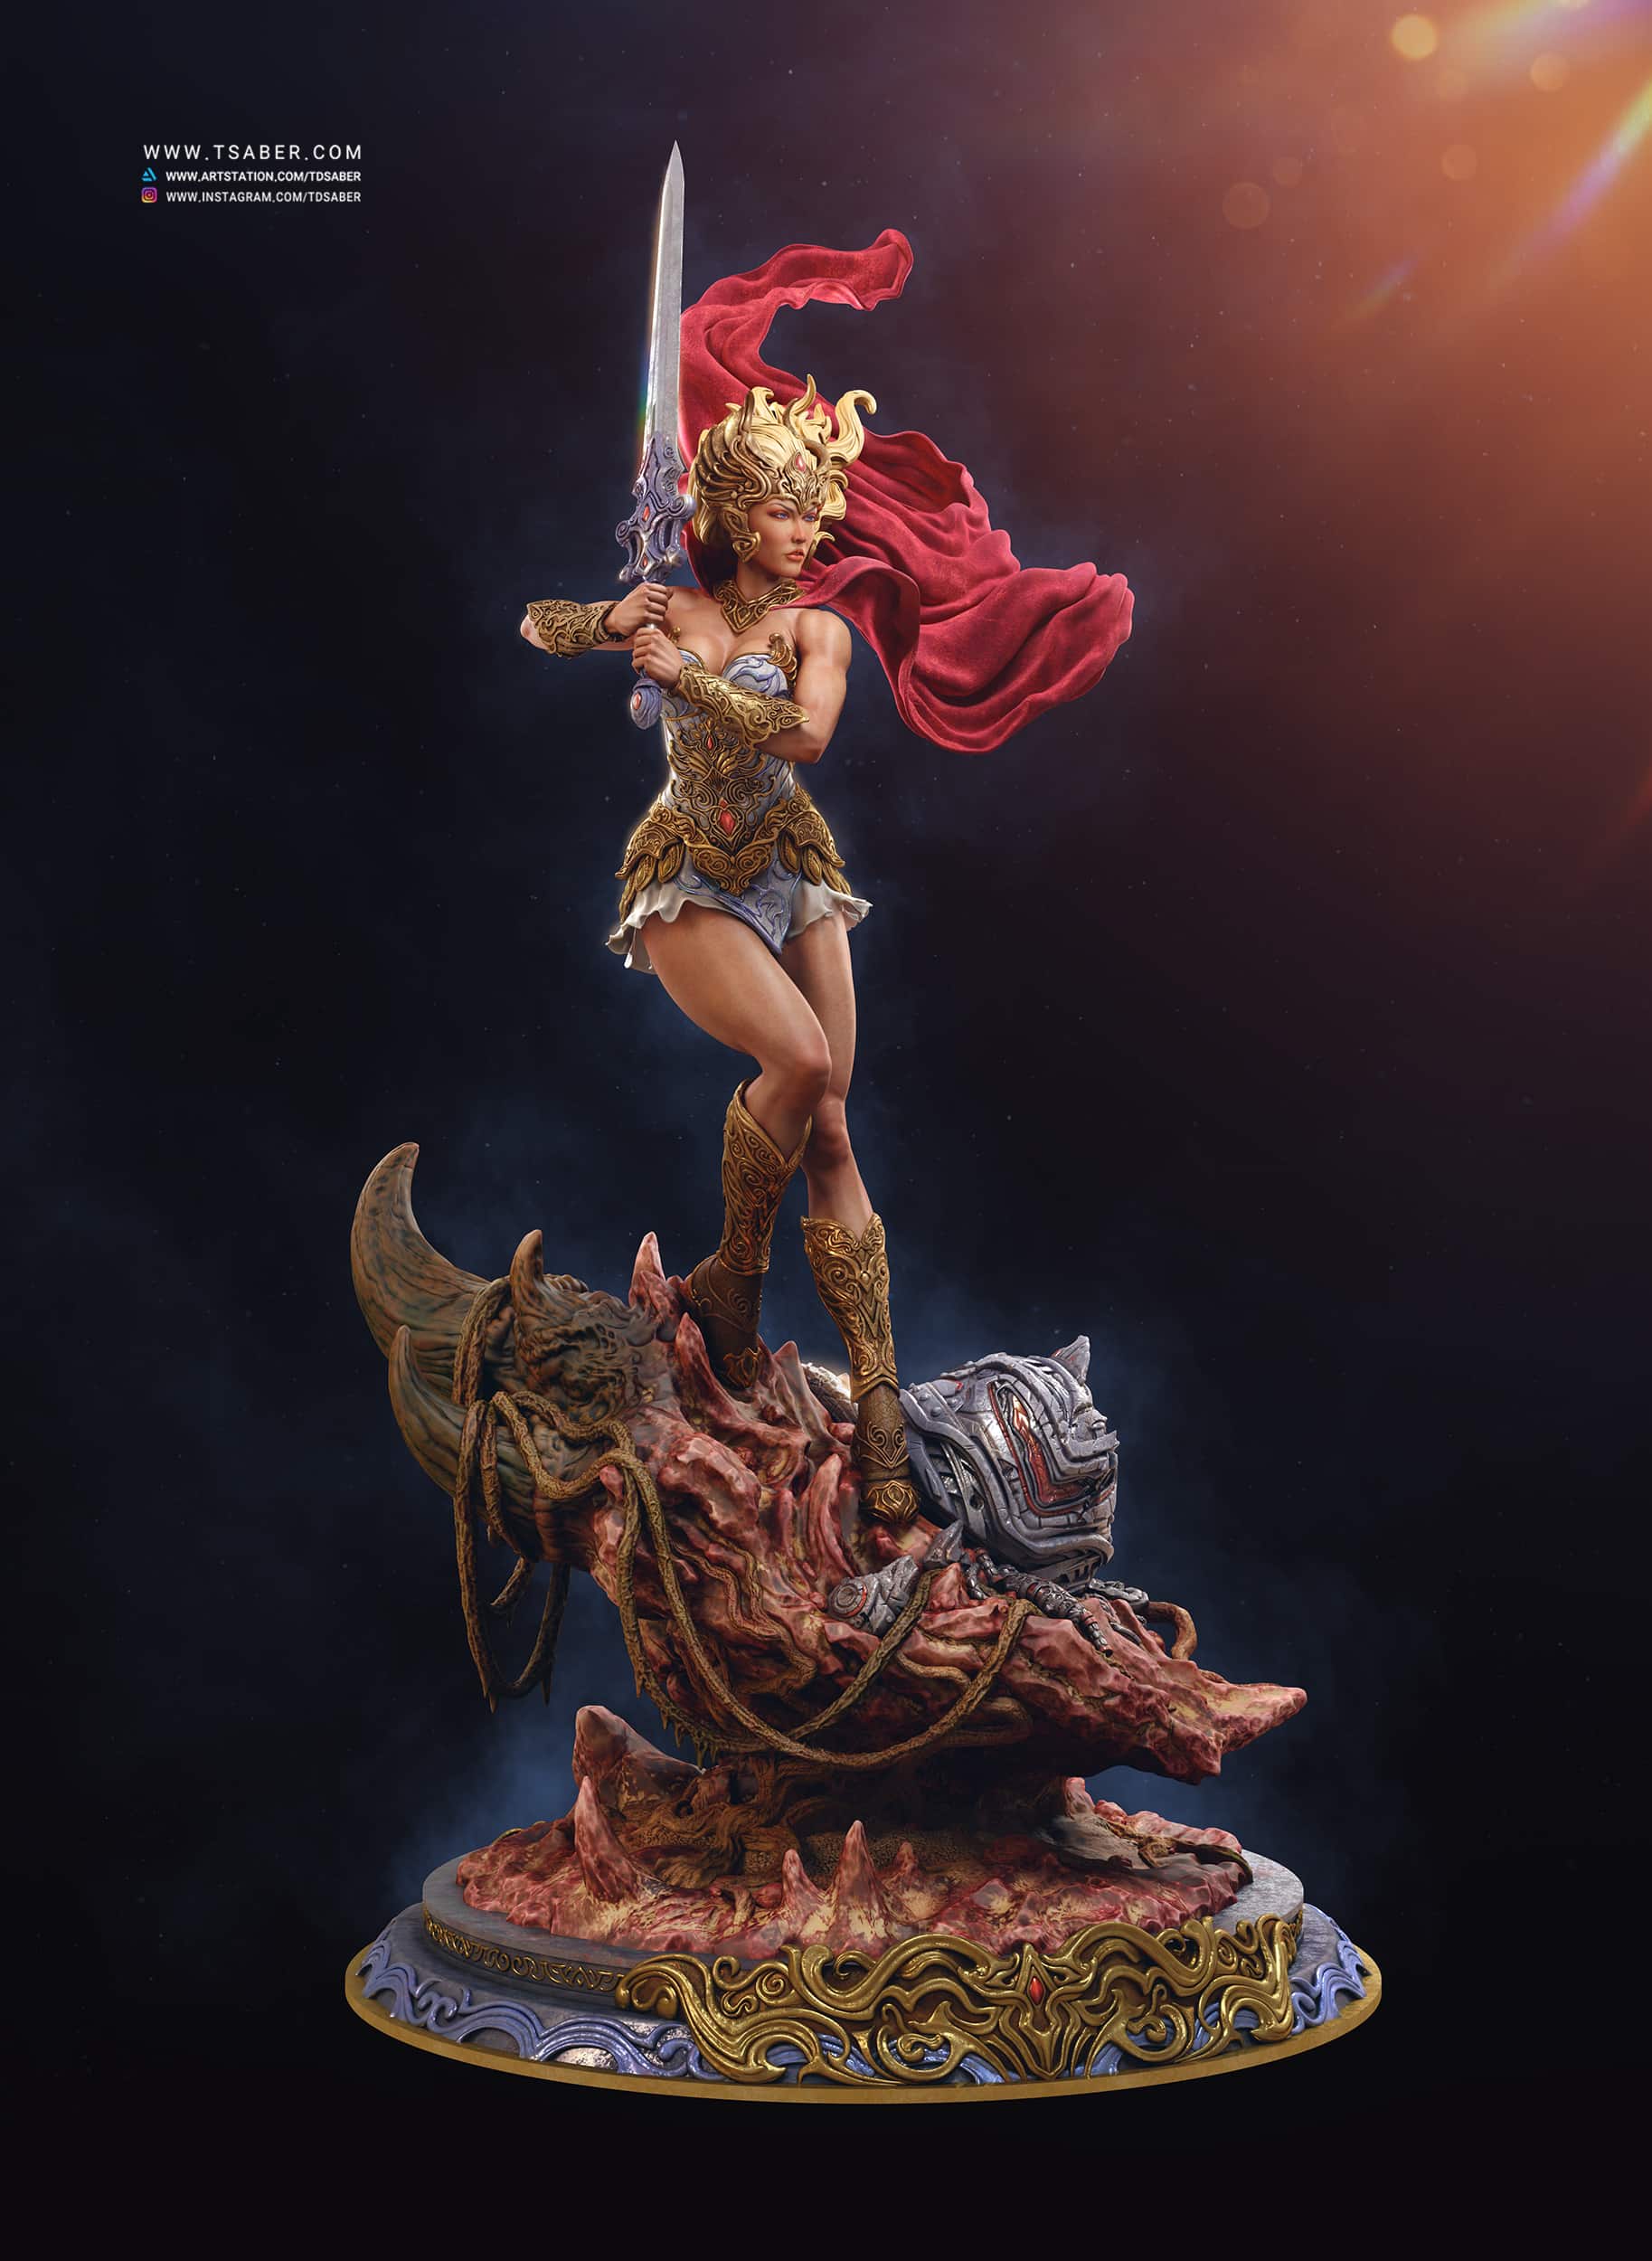 Shera Statue - Masters of the Universe – Princess Of Power - Collectible statue figurine – Tsaber - Render 03